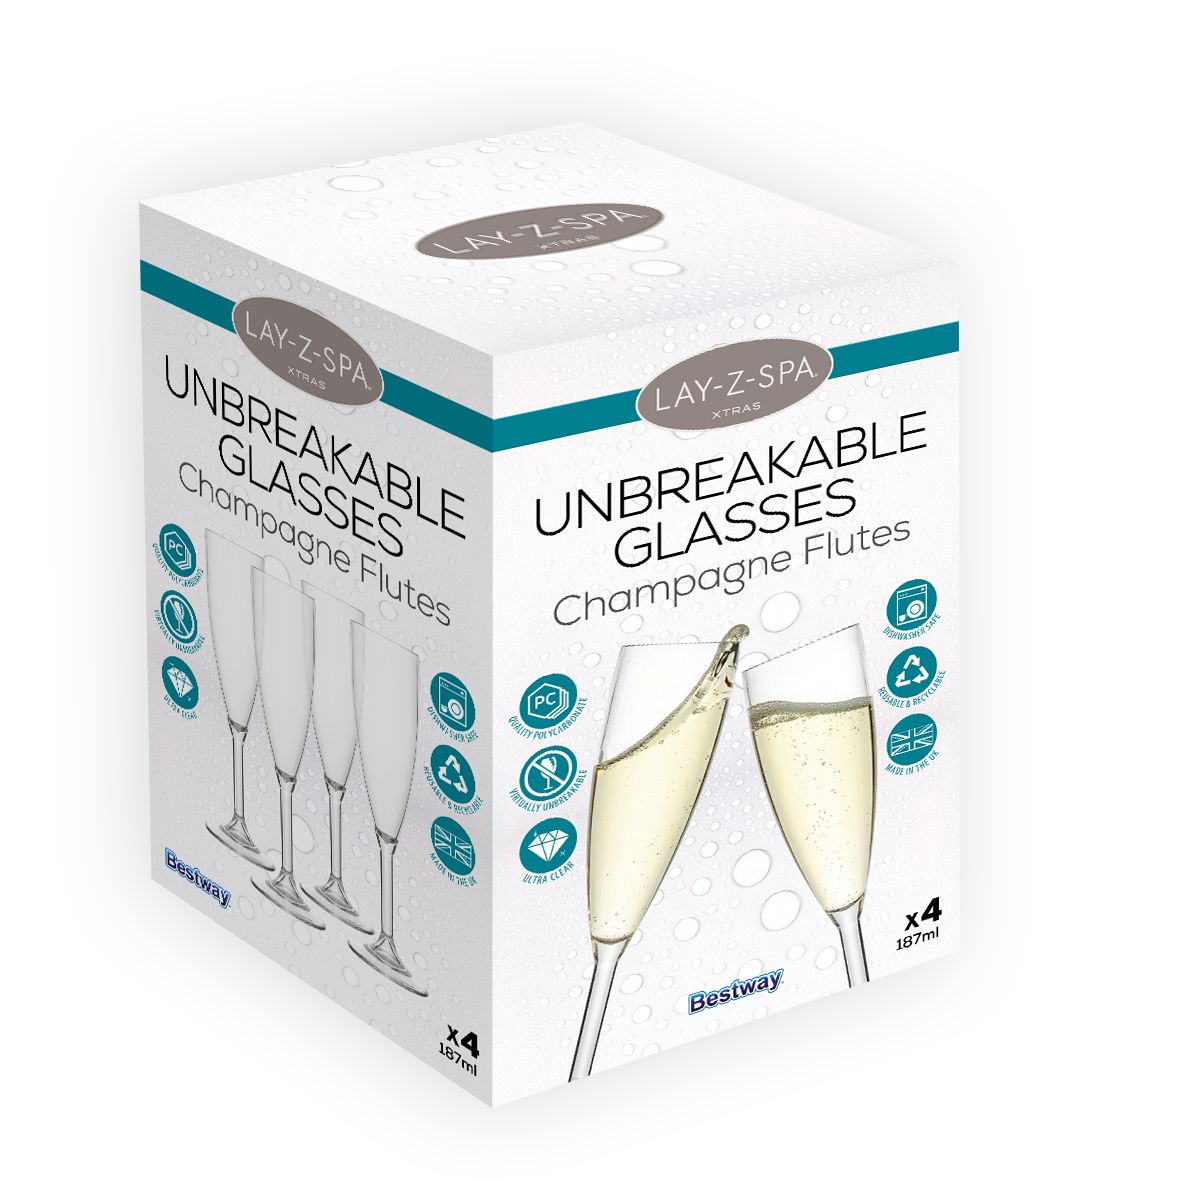 Virtually Unbreakable Polycarbonate Plastic Champagne Glass Pack of 4 